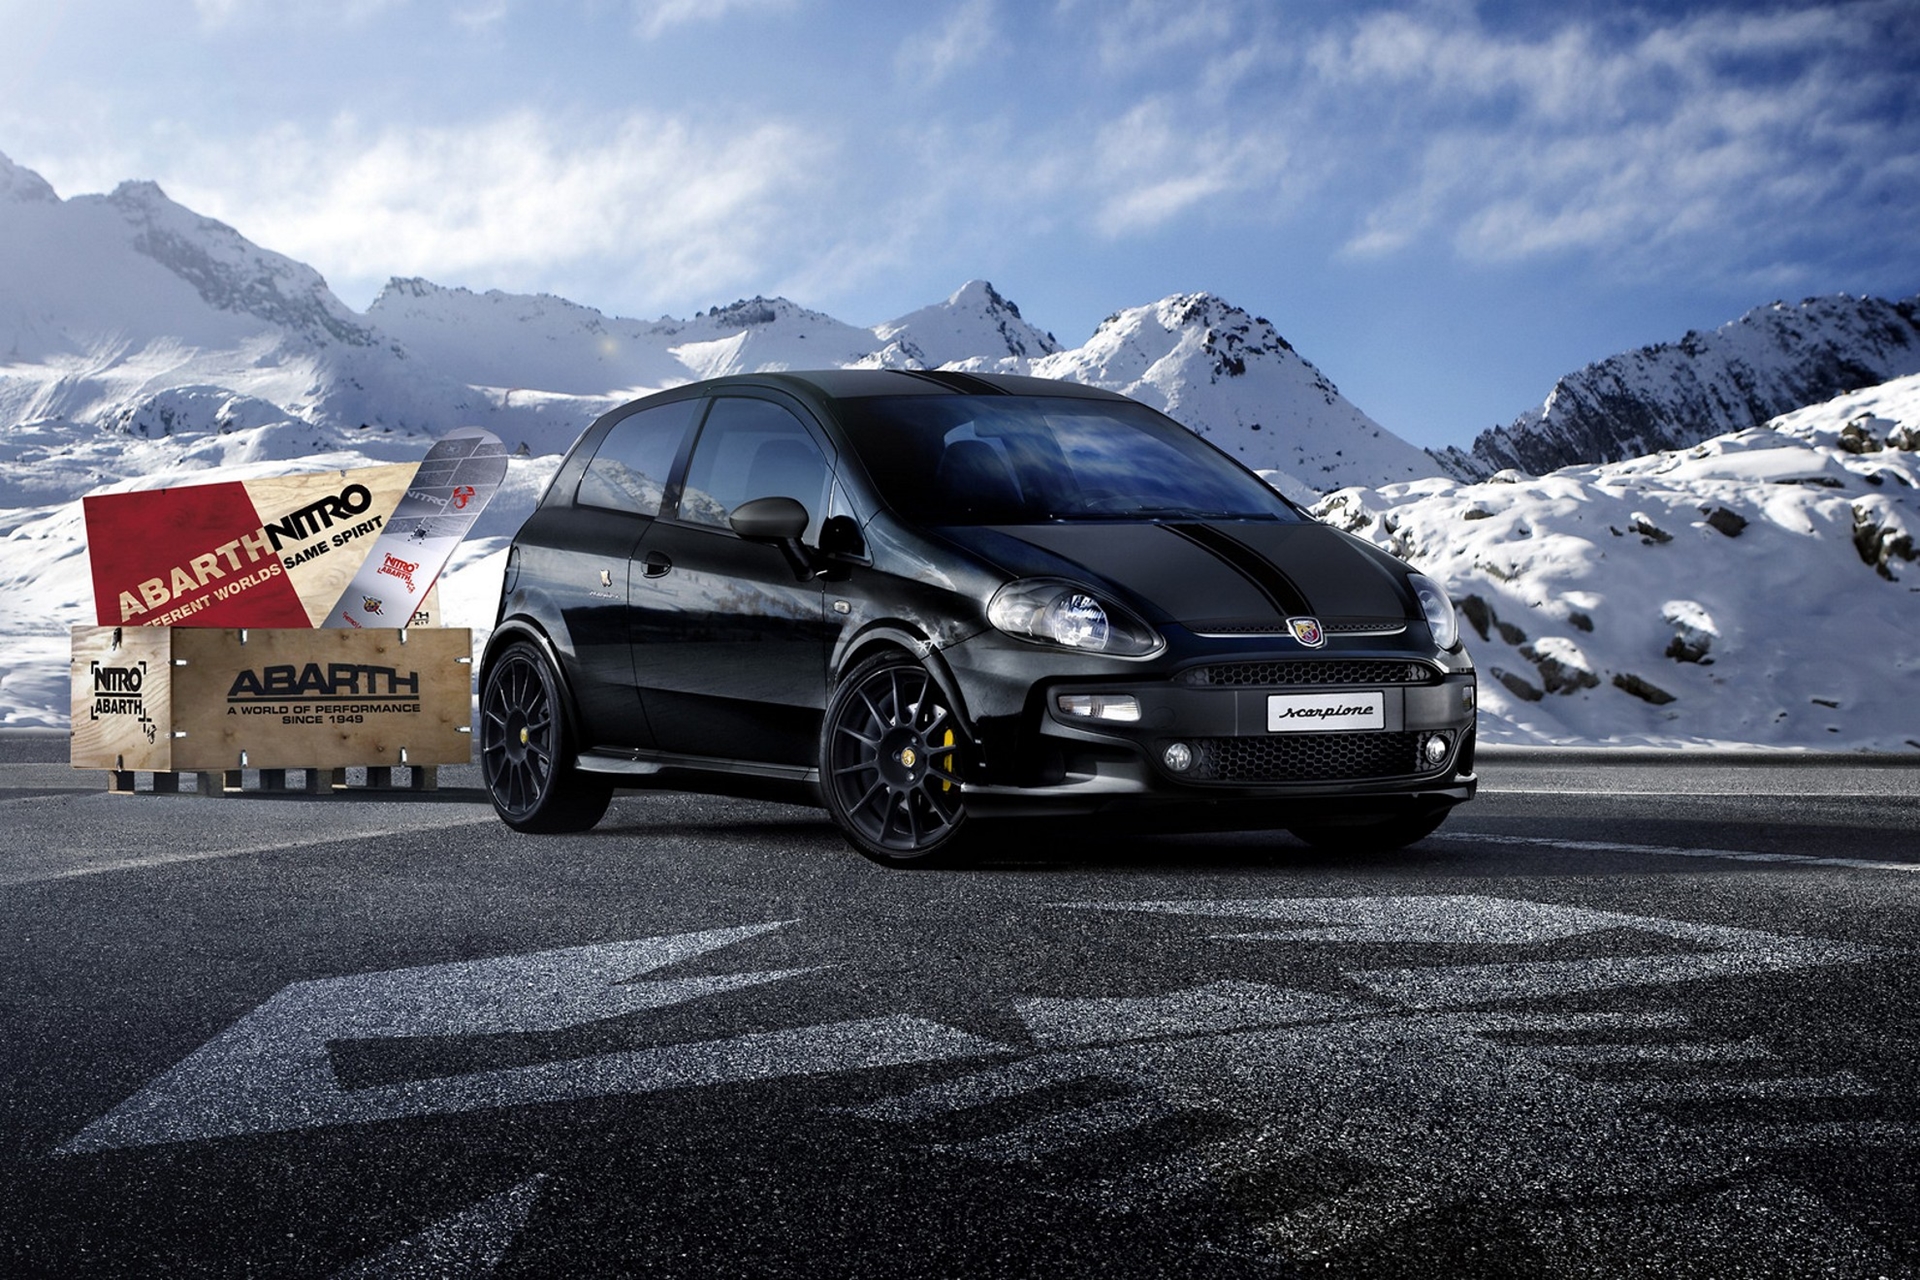 Abarth presents the ultimate expression of the Punto range.